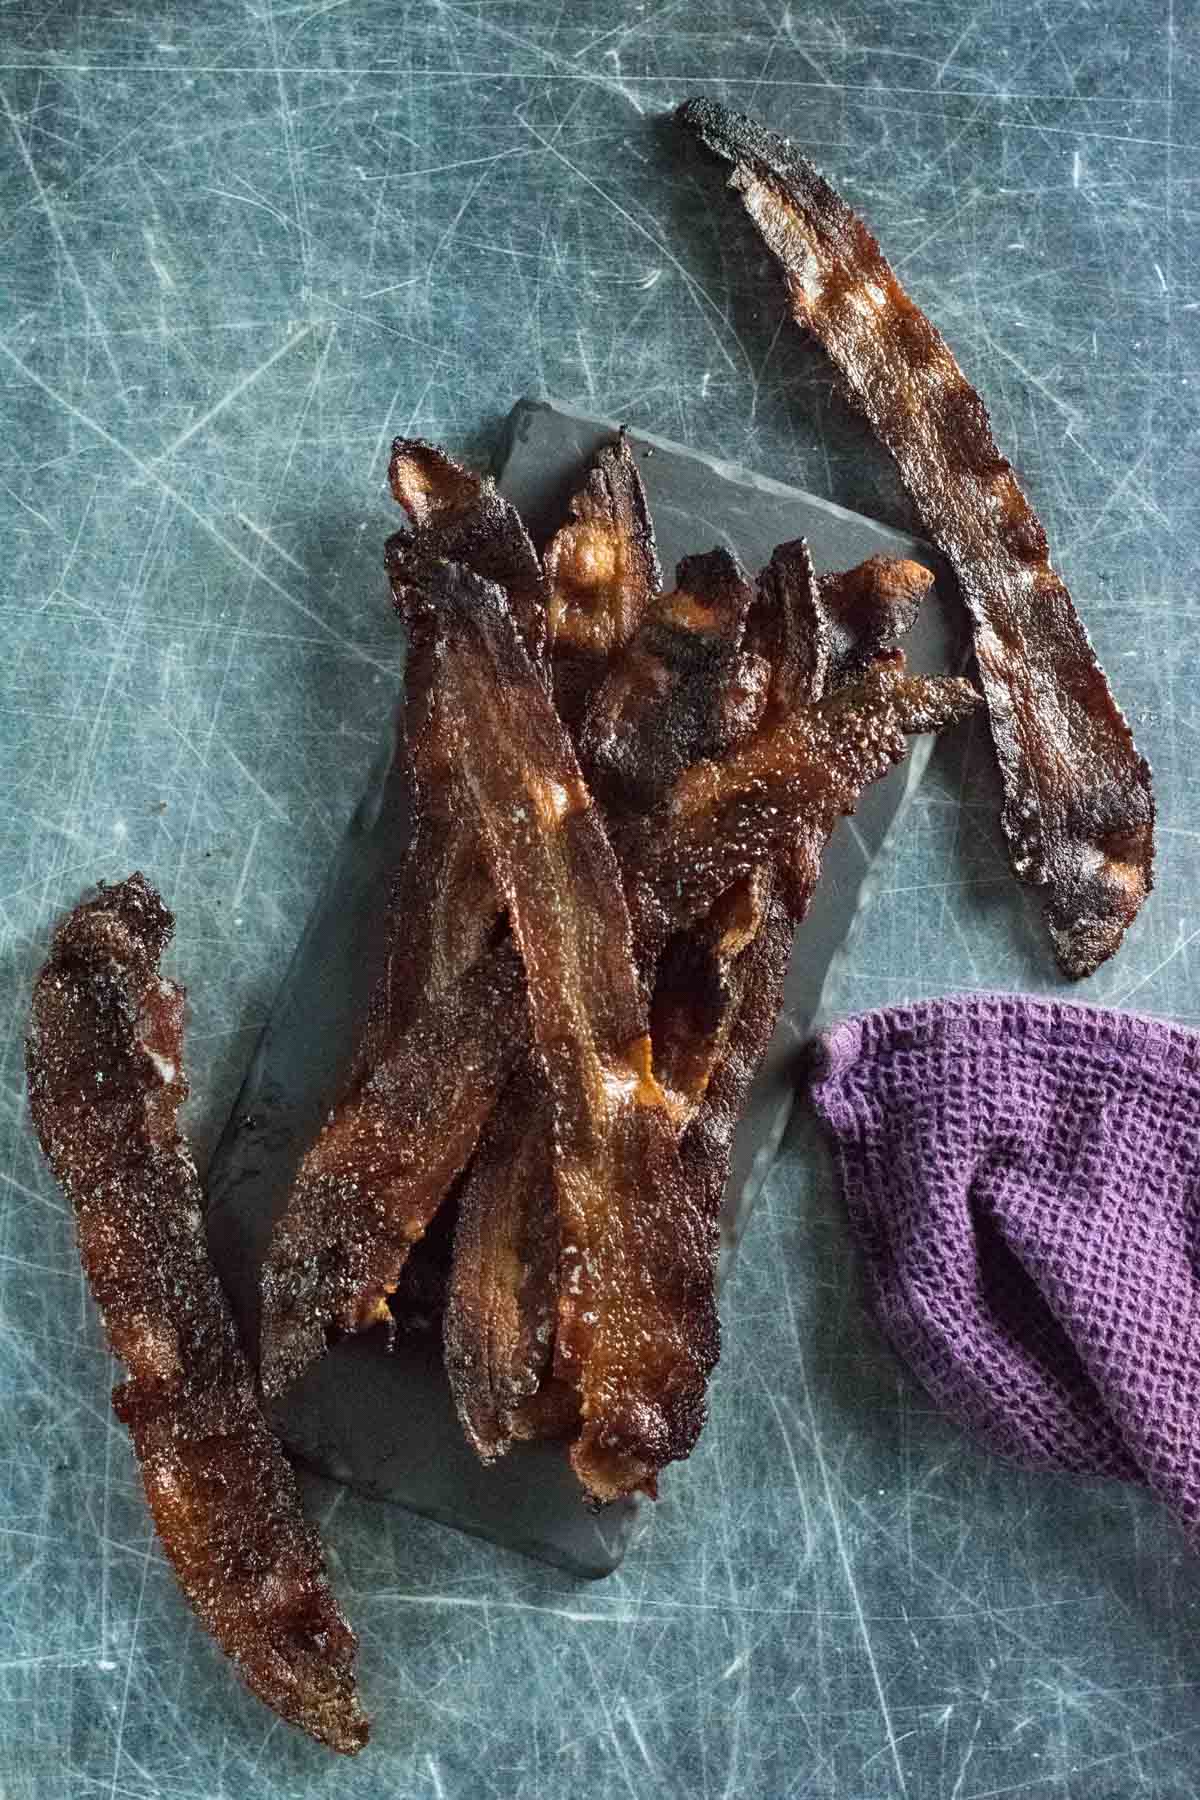 Candied bacon on black tray.